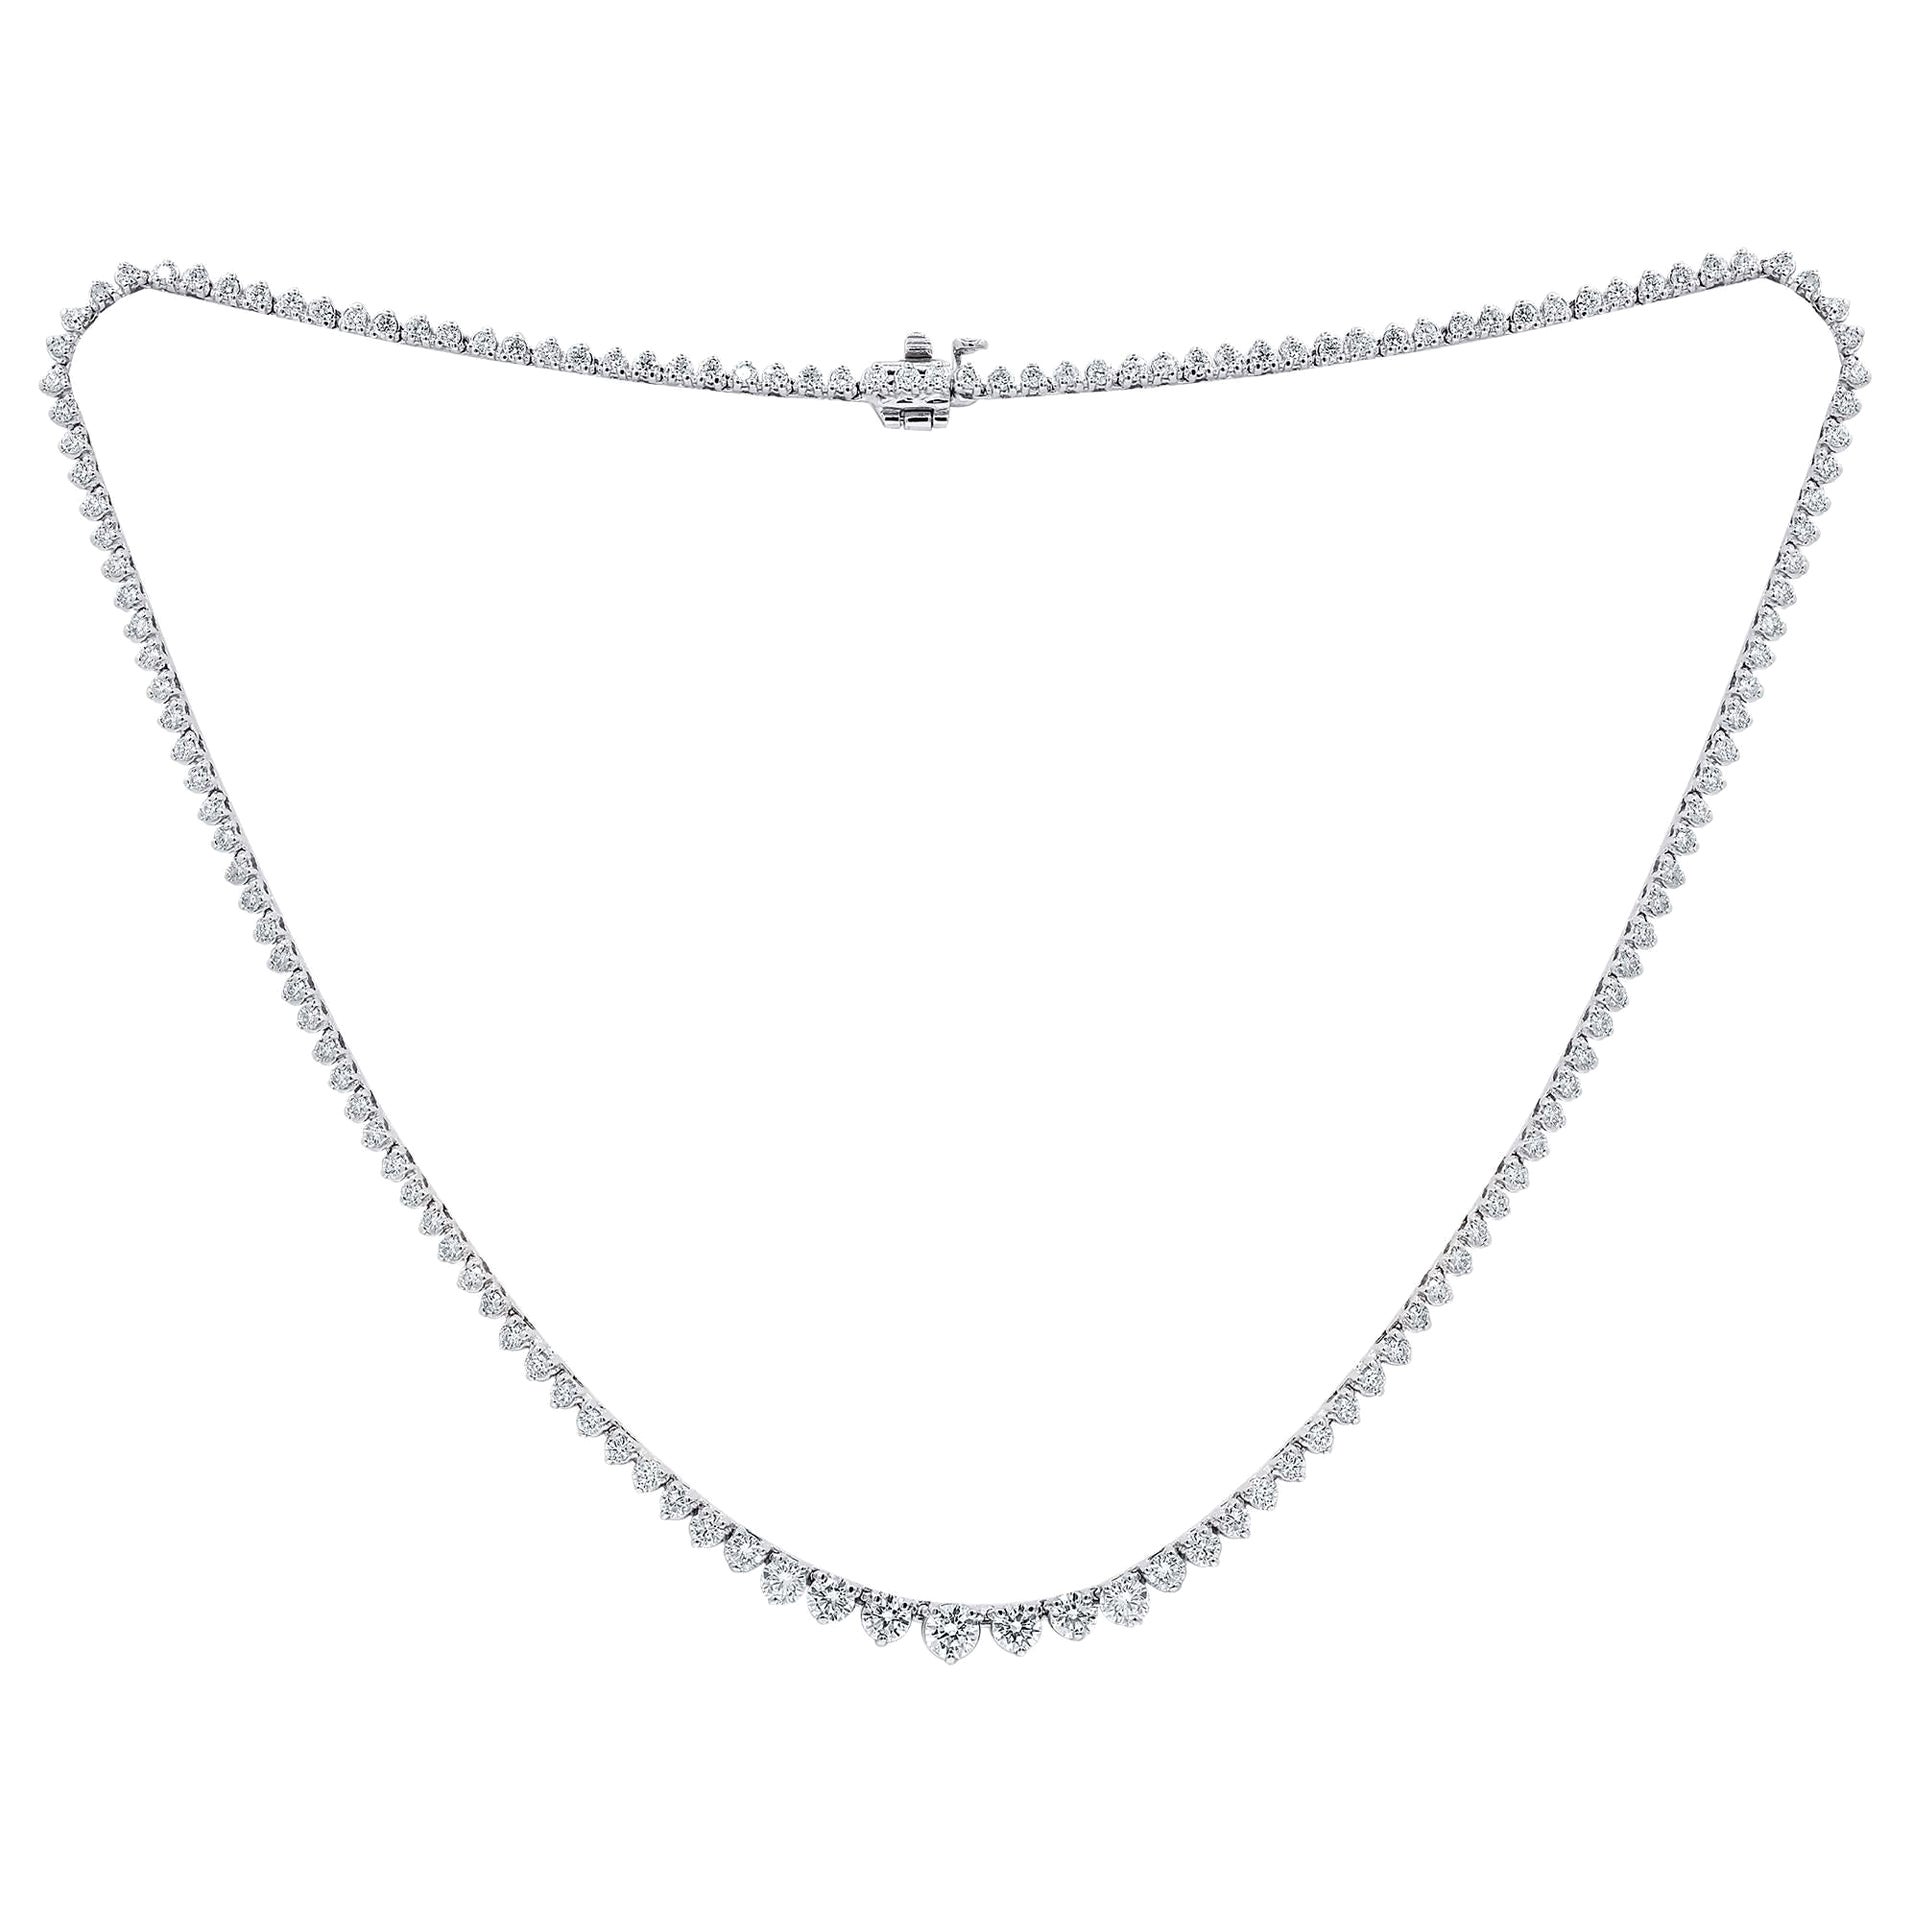 Diana M Custom 8.50 carats 14k White Gold 16" Graduated Tennis Necklace  For Sale